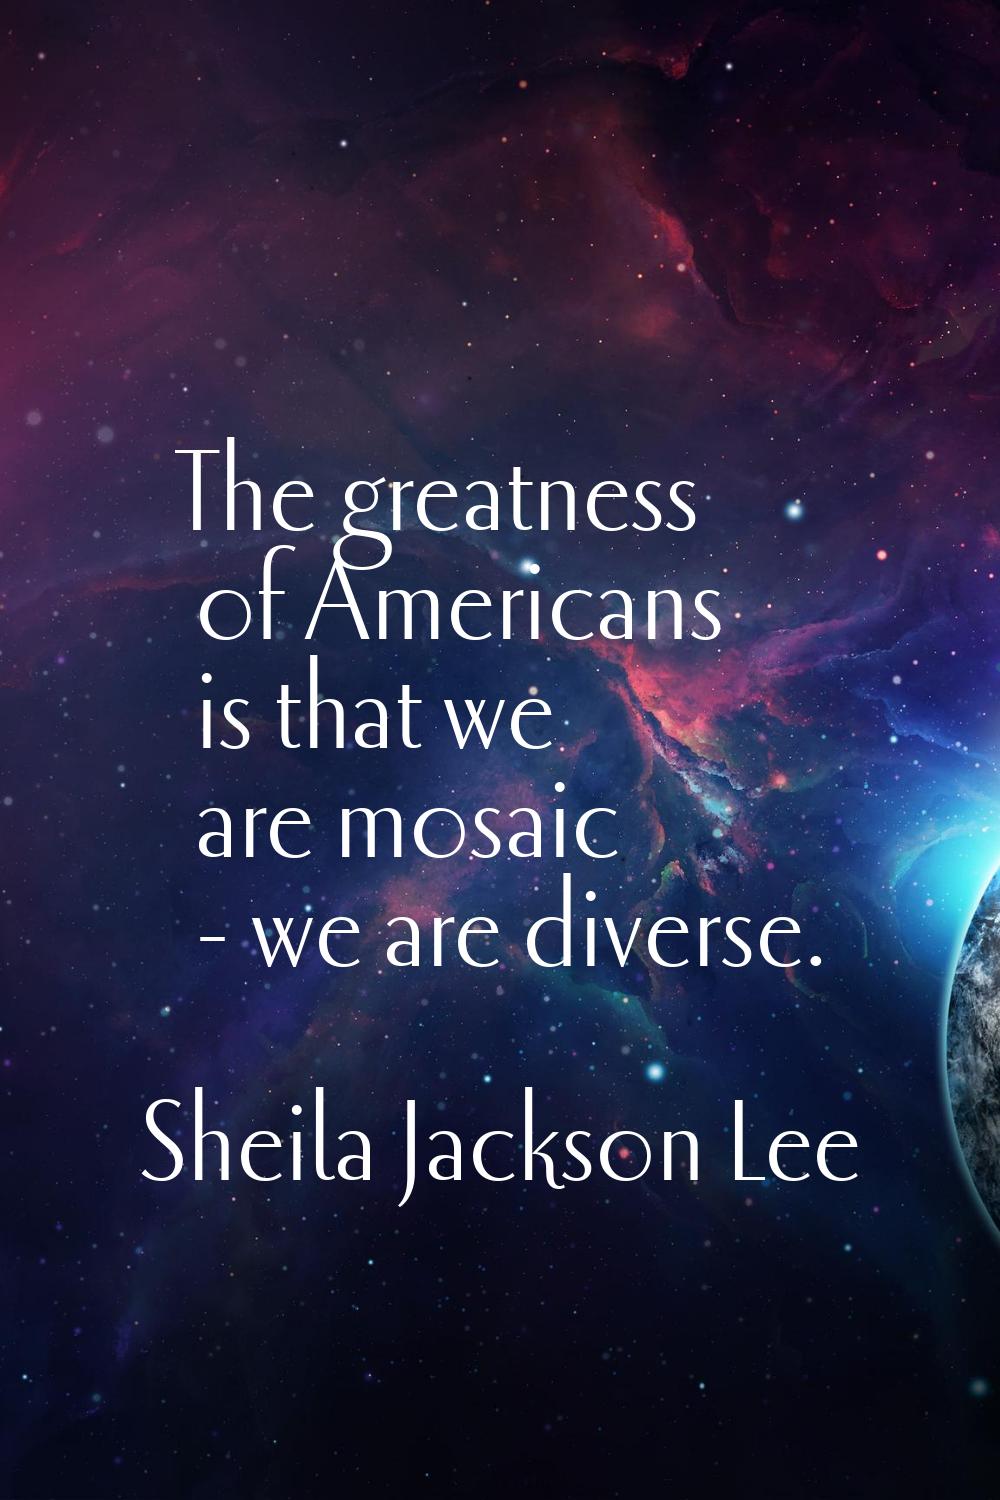 The greatness of Americans is that we are mosaic - we are diverse.